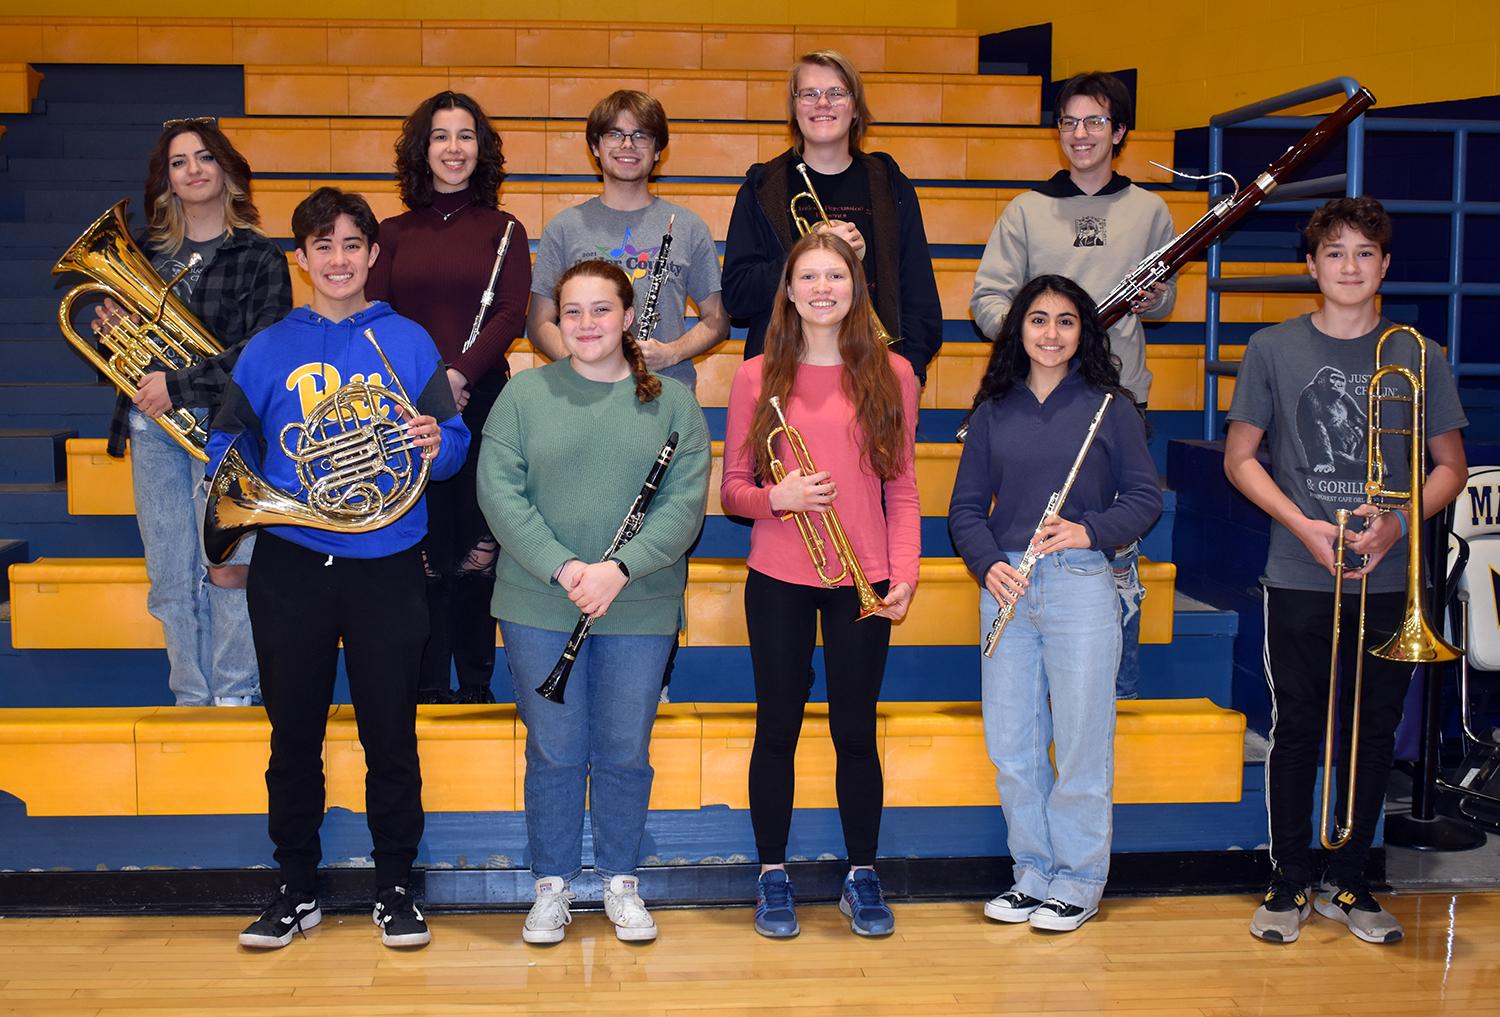 Mars Area High School students (back row, from left) Sydney Denk, Madelyn Ostapchenko, Ian Fuechslin, Alex Vedernikov, Andrew Nelson, (front row) Alex Schumann, Meghan Smith, Jenny Morrison, Adriana Najjar, Carter Snyder and (not pictured) Ethan Musler were selected to join in the PMEA District 5 Honors Band Festival.